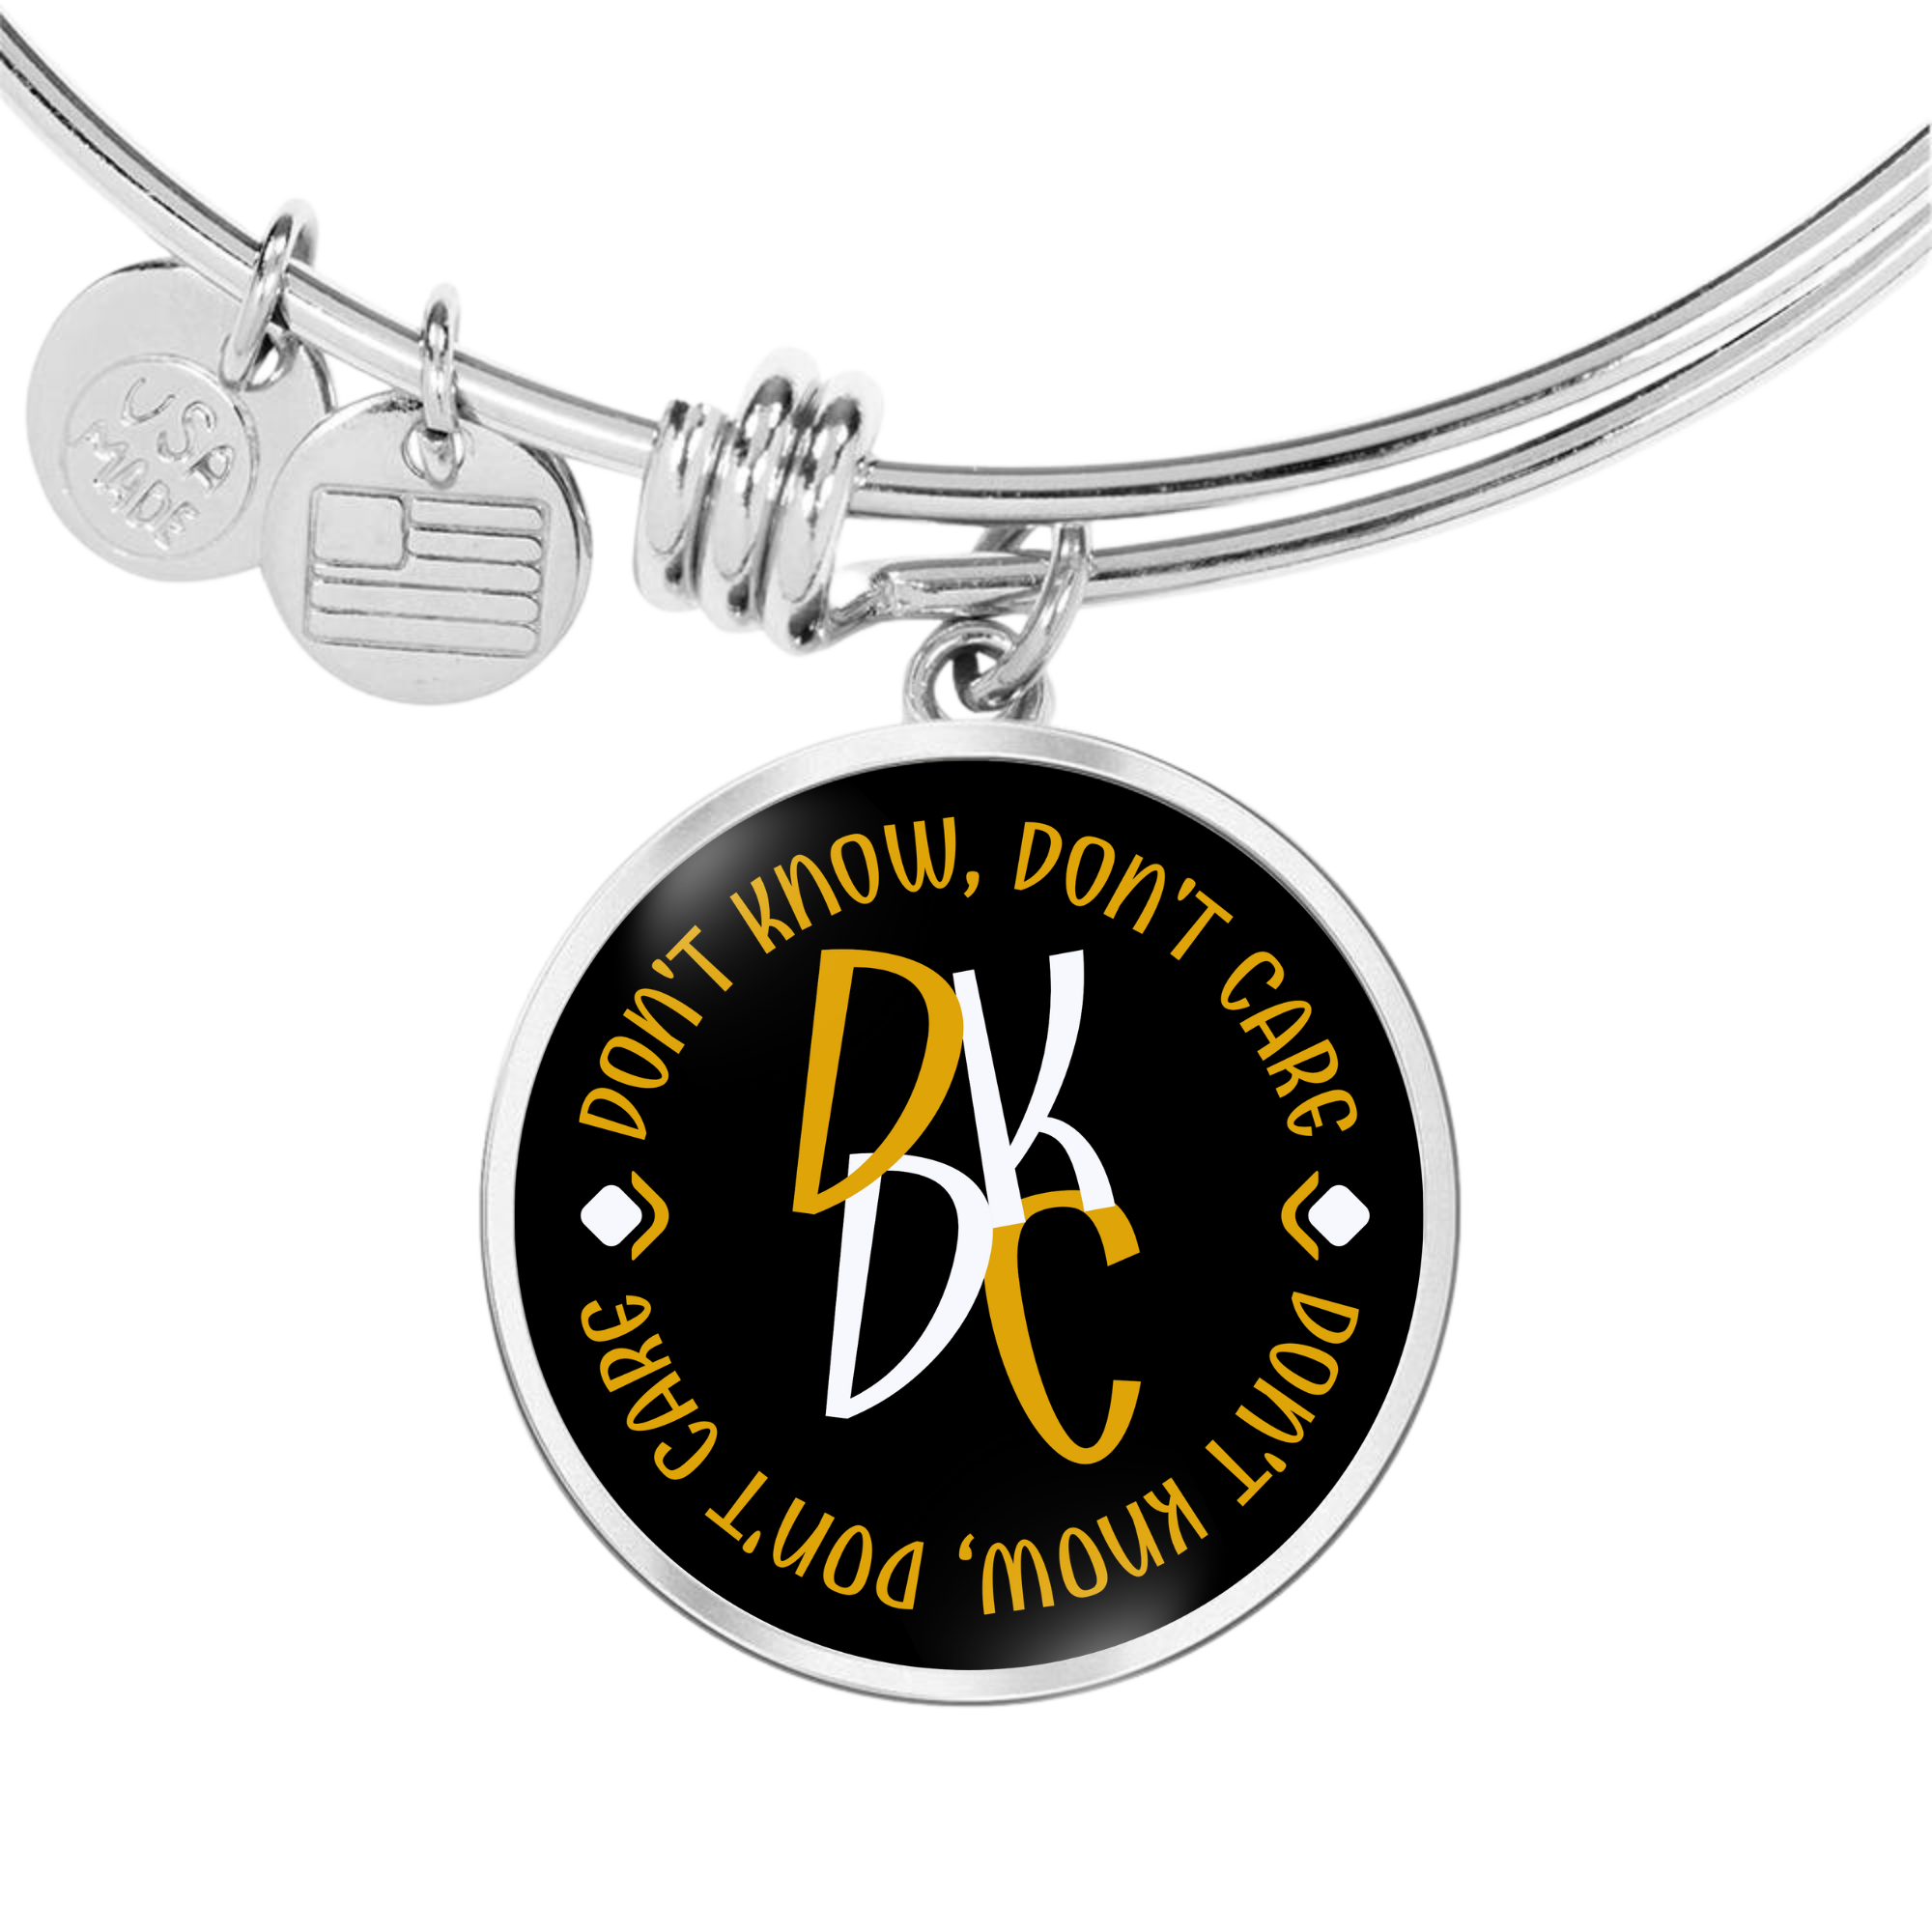 DKDC - Don't Know, Don't Care || Pendant Bangle || PERSONALIZABLE